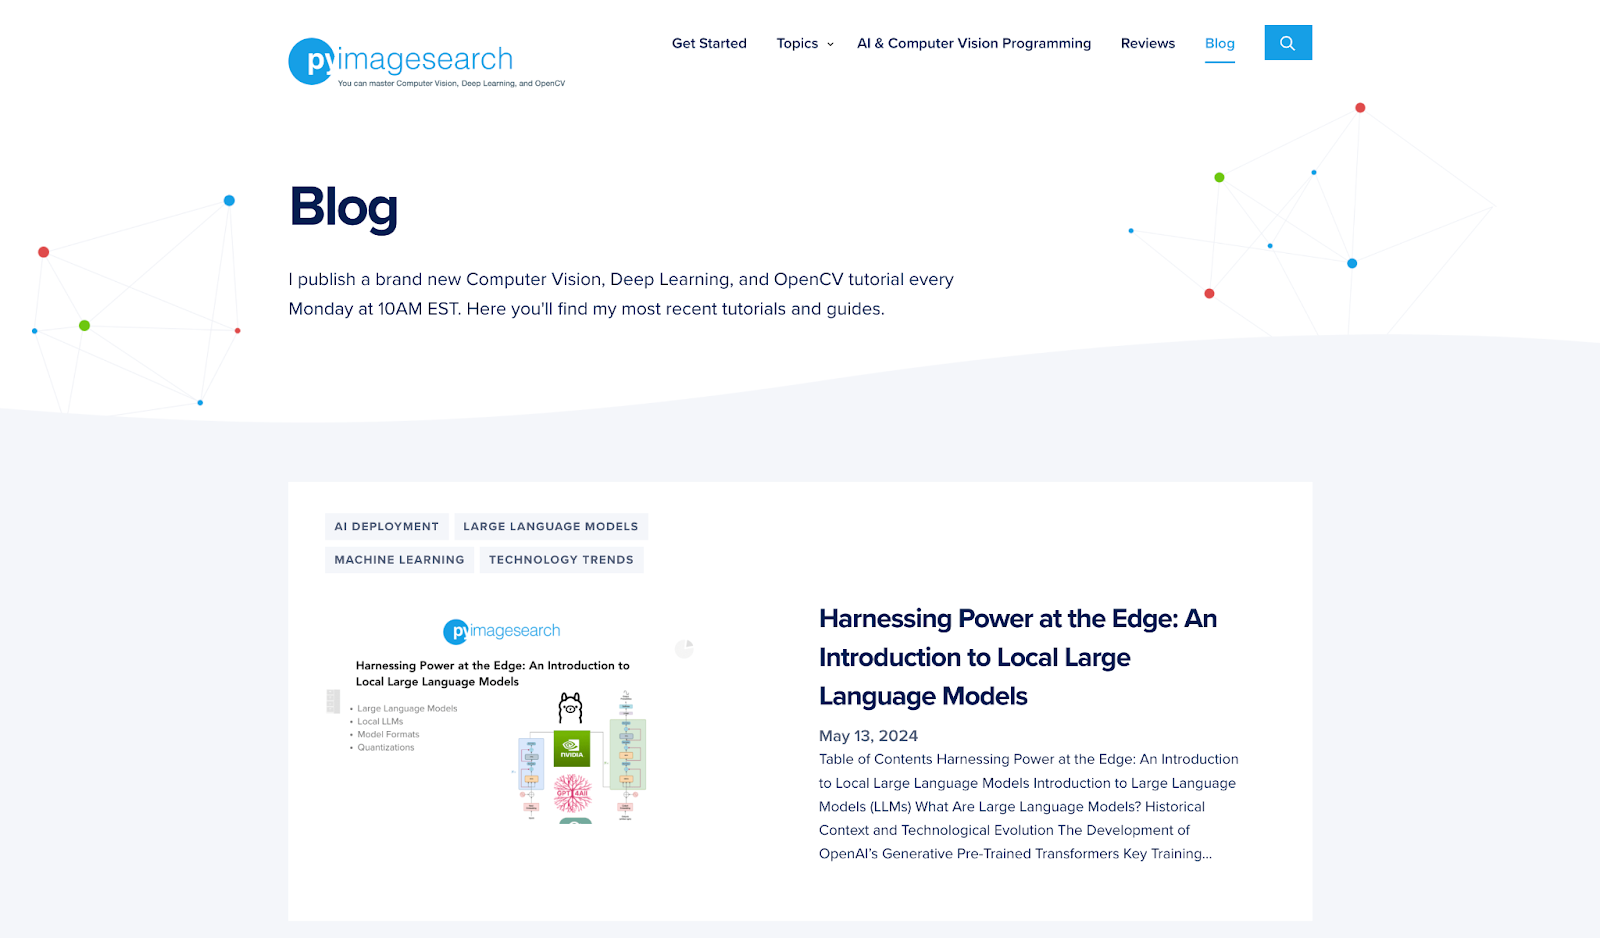 PyImageSearch